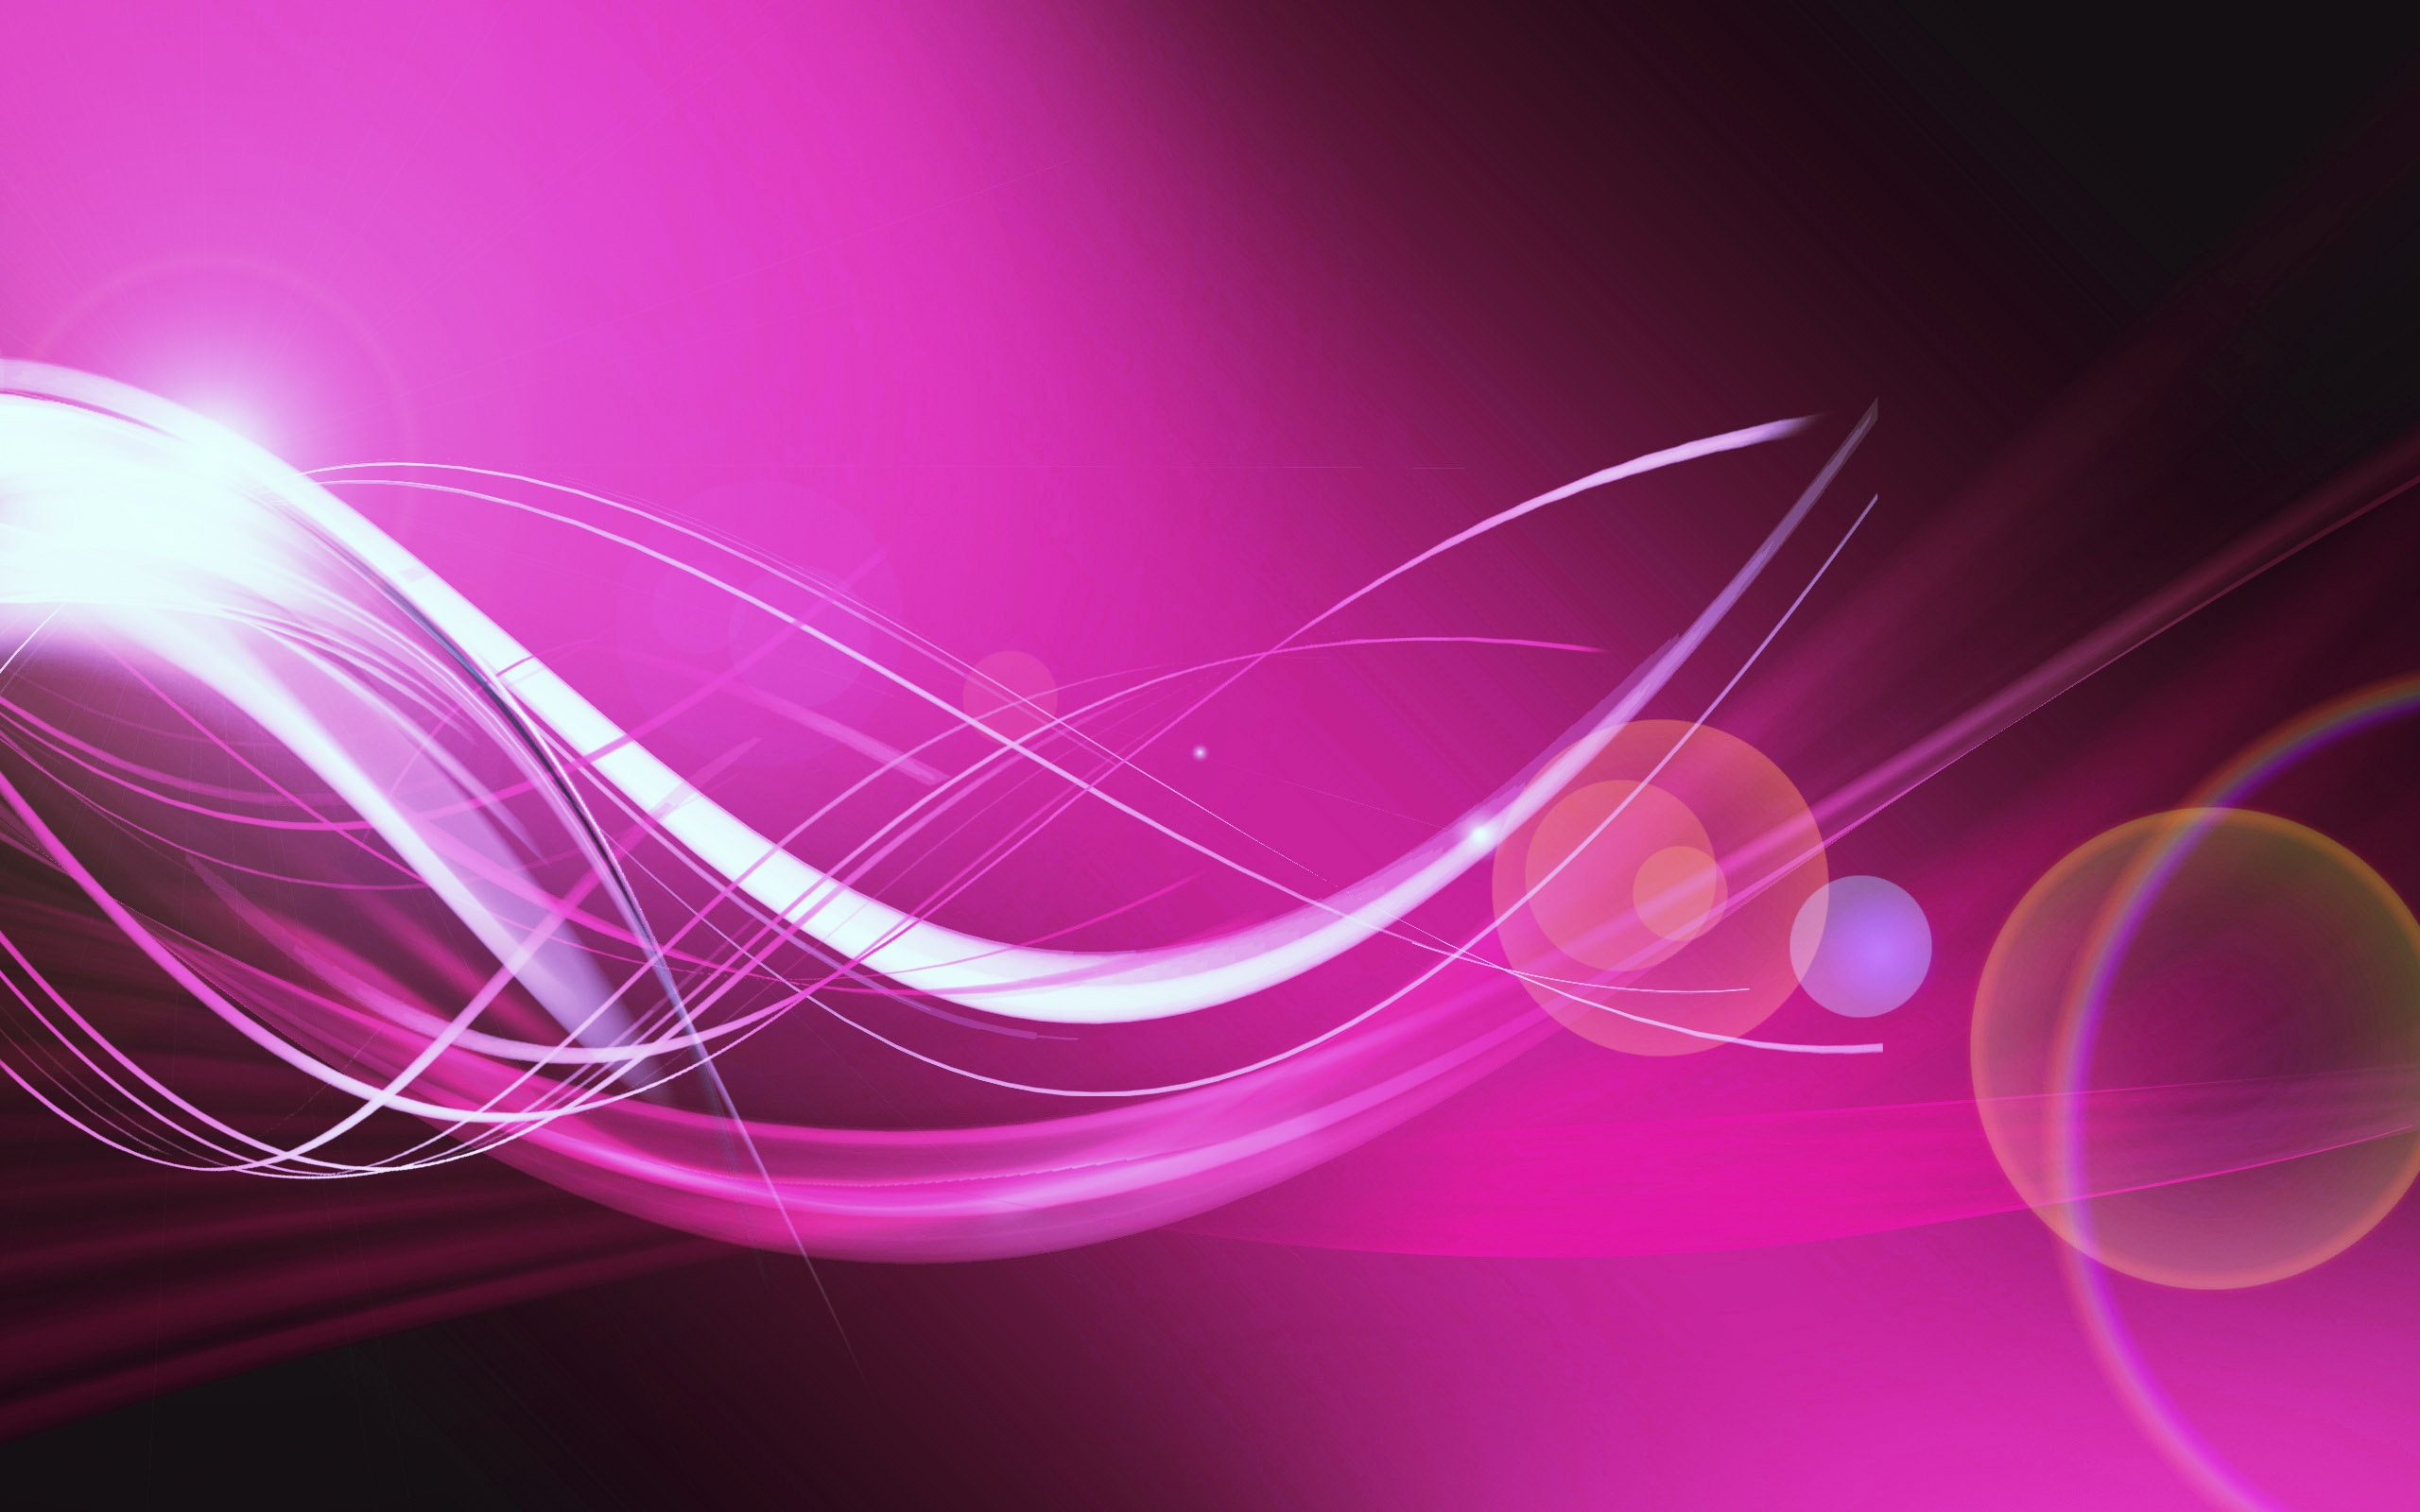 hd graphics wallpaper,pink,purple,violet,red,graphic design